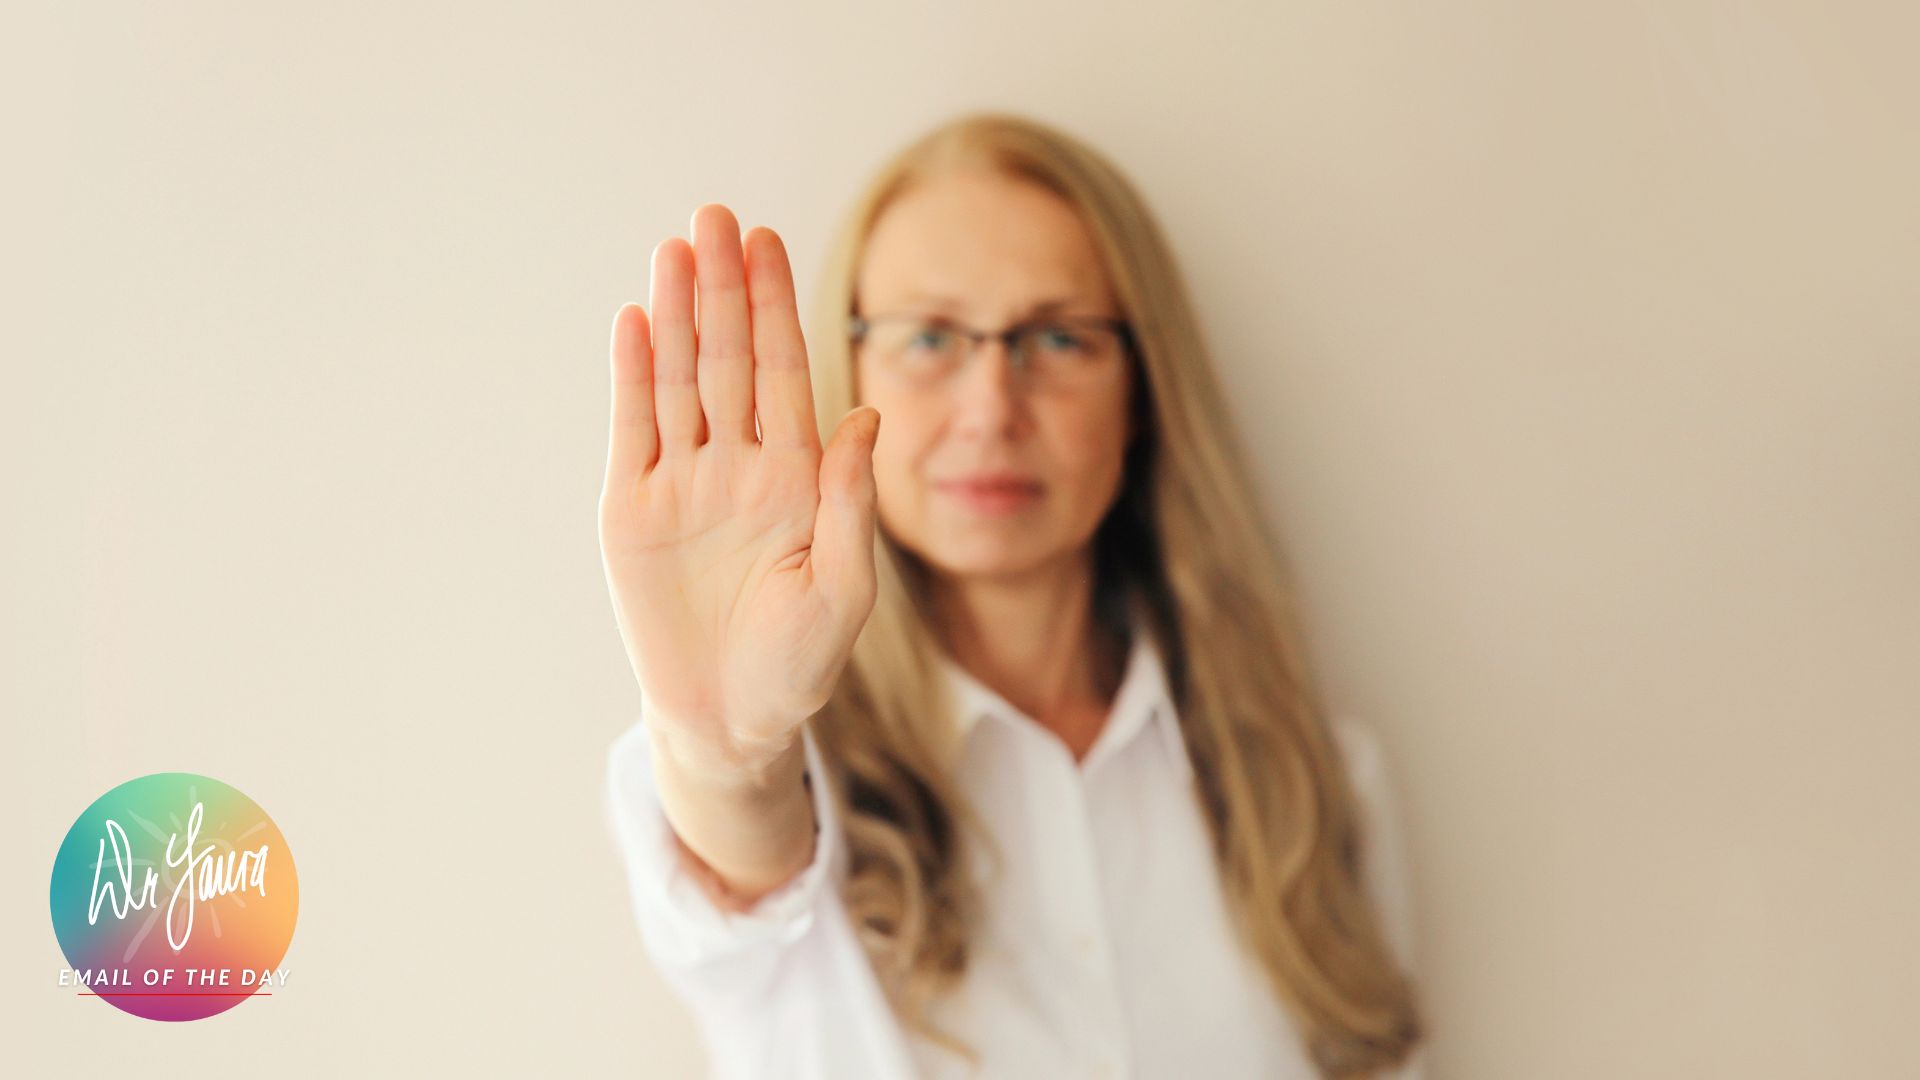 Older woman wearing glasses holds out palm in front of her